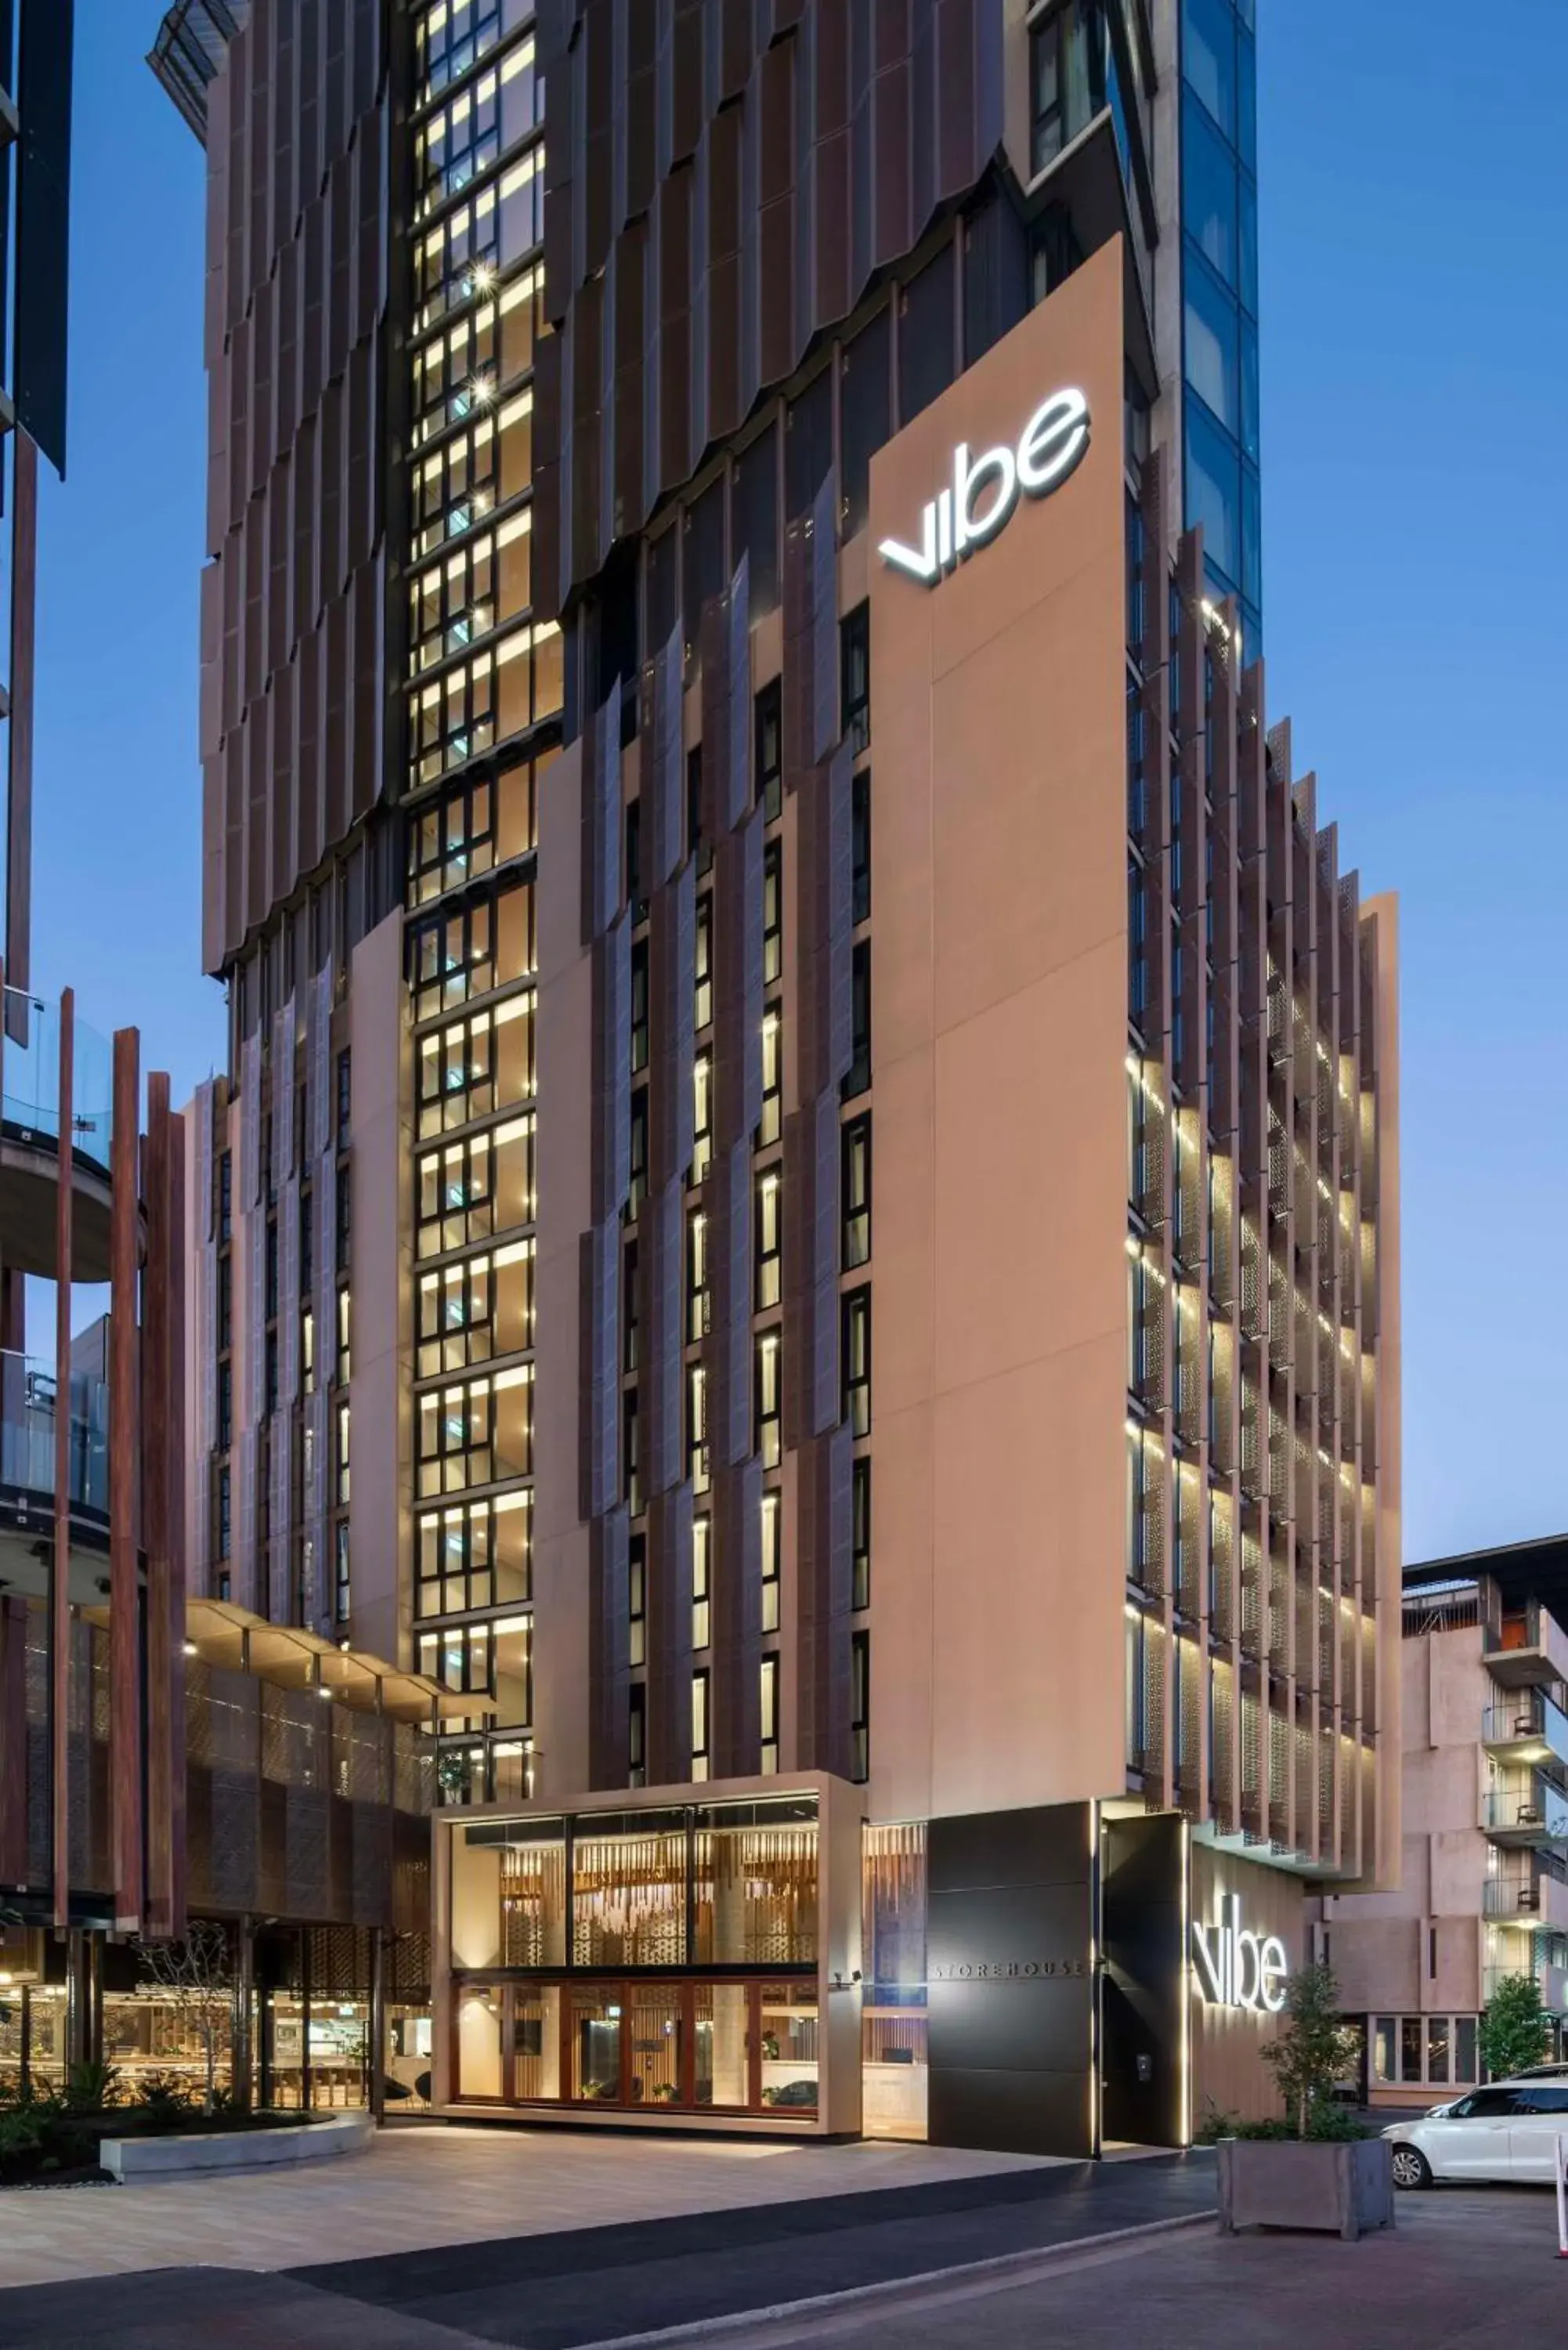 Property Building in Vibe Hotel Adelaide